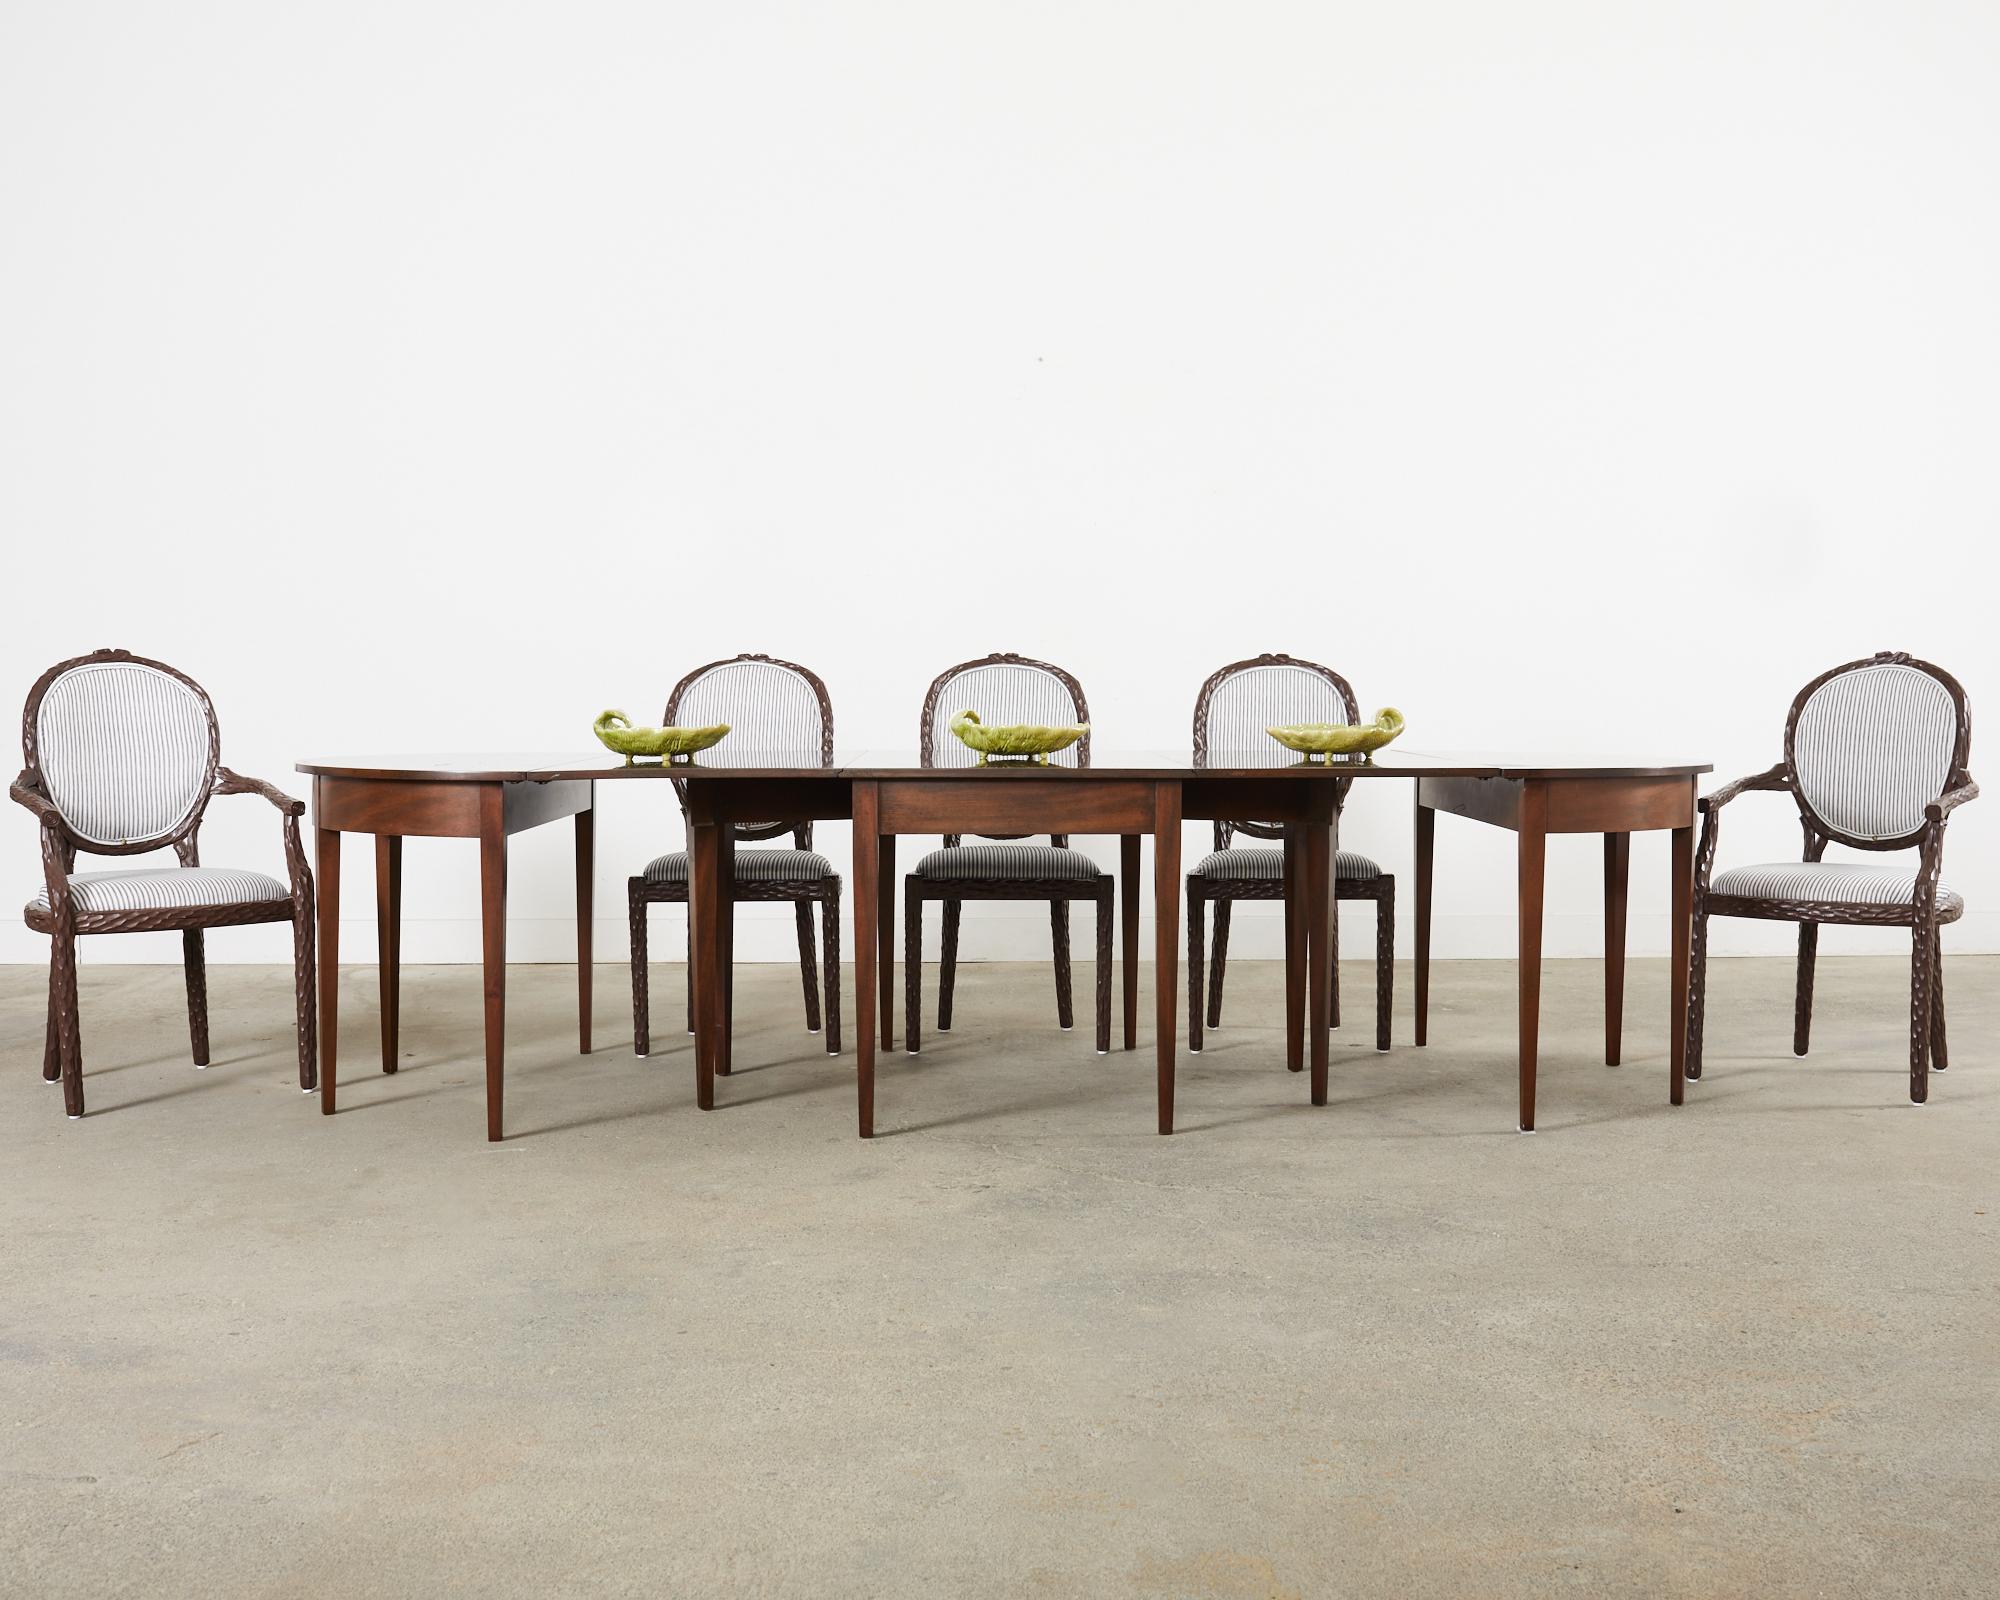 Handsome set of six mid-century modern Italian regency style dining chairs featuring a hand-carved faux bois twig finish on the frames. The carved frames are lacquered in a rich, dark espresso color. The set consists of 4 side chairs and 2 host